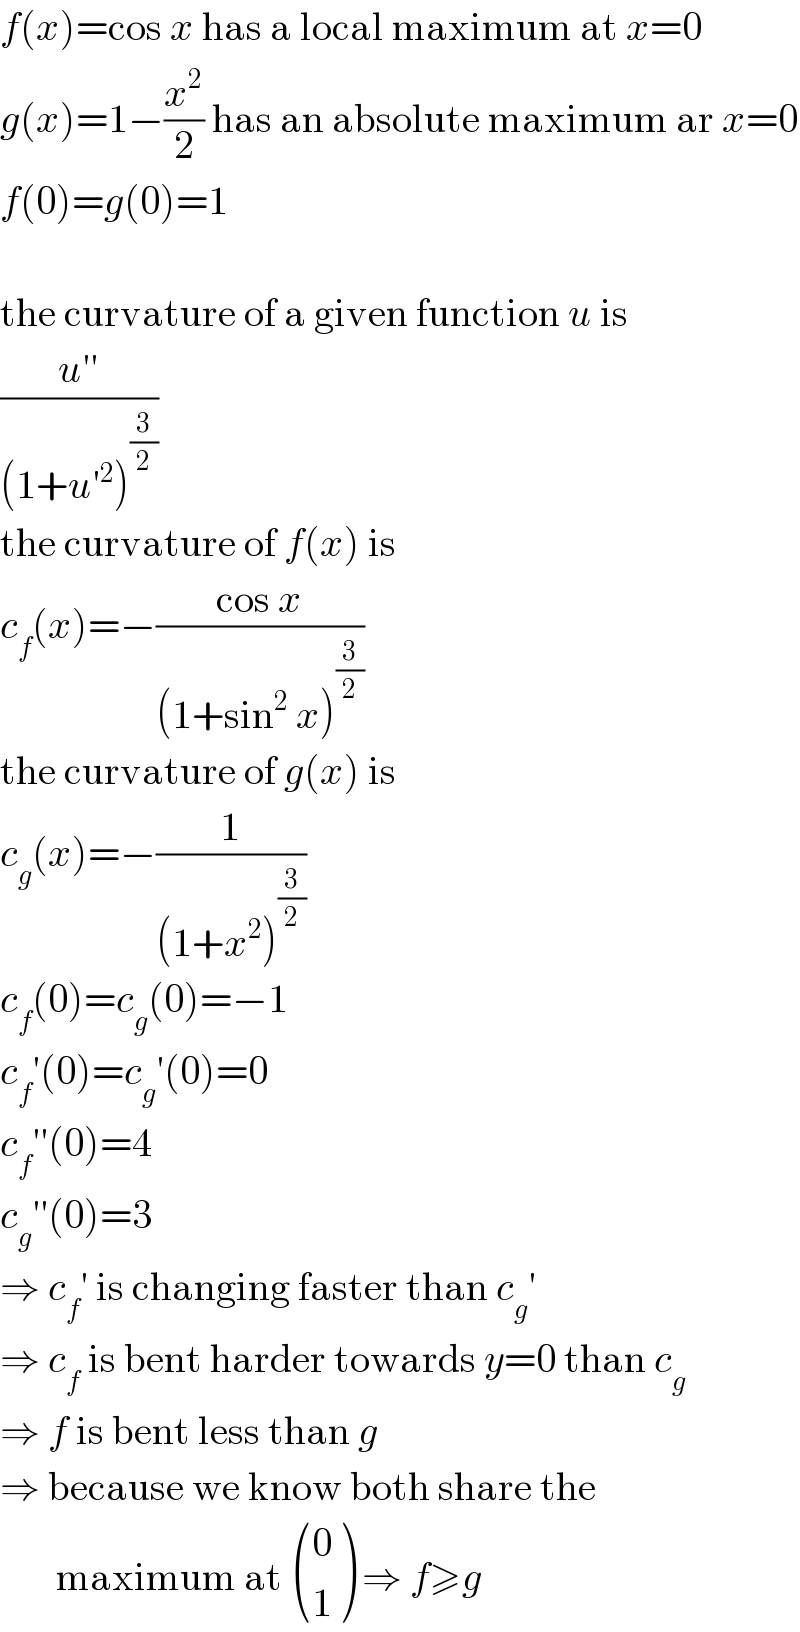 f(x)=cos x has a local maximum at x=0  g(x)=1−(x^2 /2) has an absolute maximum ar x=0  f(0)=g(0)=1    the curvature of a given function u is  ((u′′)/((1+u′^2 )^(3/2) ))  the curvature of f(x) is  c_f (x)=−((cos x)/((1+sin^2  x)^(3/2) ))  the curvature of g(x) is  c_g (x)=−(1/((1+x^2 )^(3/2) ))  c_f (0)=c_g (0)=−1  c_f ′(0)=c_g ′(0)=0  c_f ′′(0)=4  c_g ′′(0)=3  ⇒ c_f ′ is changing faster than c_g ′  ⇒ c_f  is bent harder towards y=0 than c_g   ⇒ f is bent less than g  ⇒ because we know both share the         maximum at  ((0),(1) ) ⇒ f≥g  